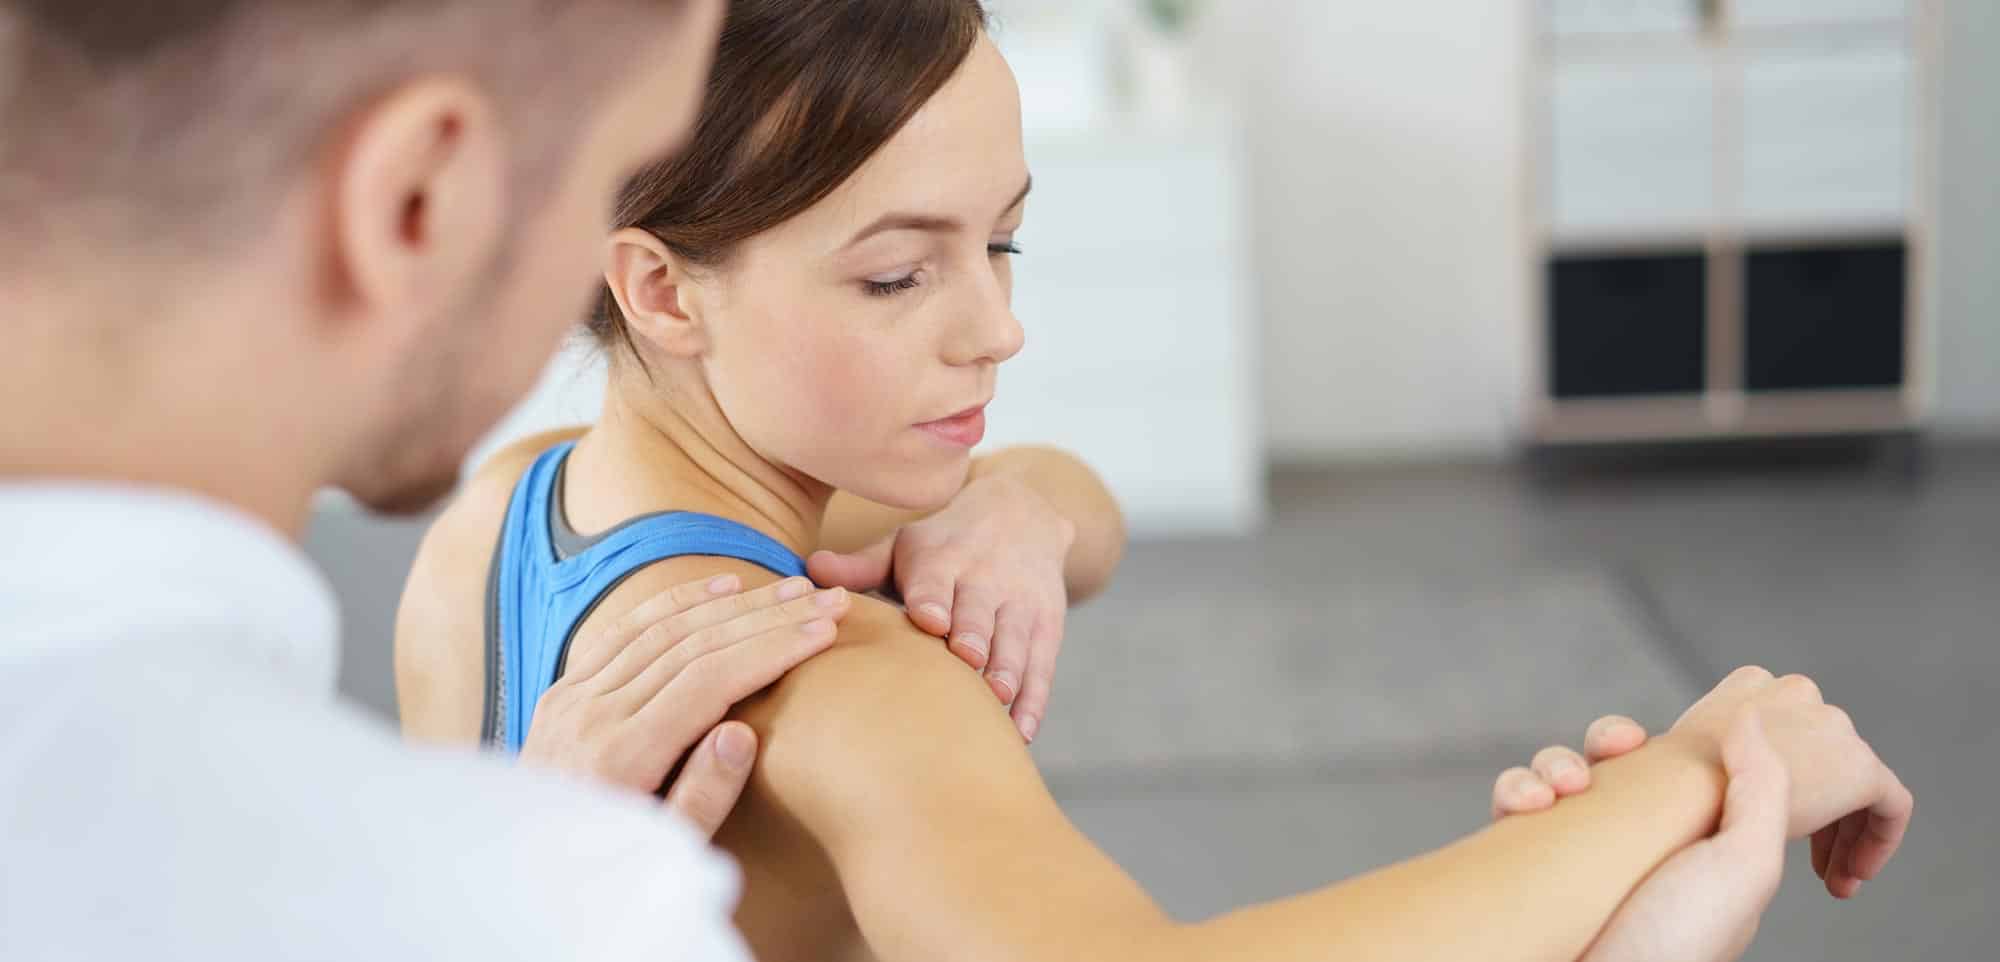 Lady having her right shoulder treated by a chiro. she is sitting with her arm raised. the male chiro is supported the arm and palpating her shoulder. Osteopath shoulder treatment. bursitis or rotator cuff injury.